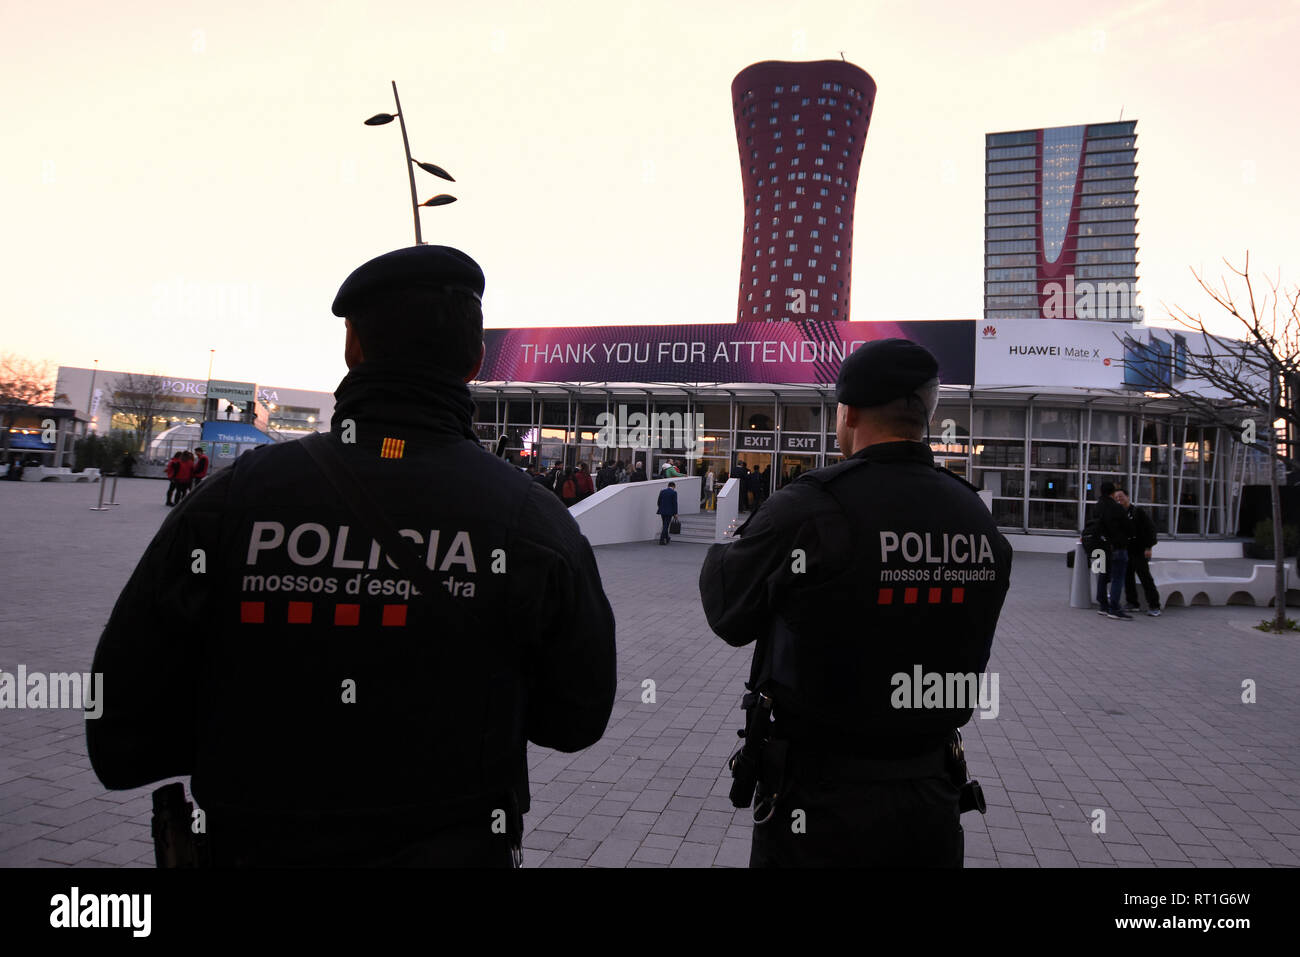 February 27, 2019 - LÂ´Hospitalet, Catalonia, Spain - Agents of the Catalan Police Mossos d'Escuadra are seen standing on guard at the entrance of the Mobile World Congress 2019 in Barcelona. Credit: Ramon Costa/SOPA Images/ZUMA Wire/Alamy Live News Stock Photo